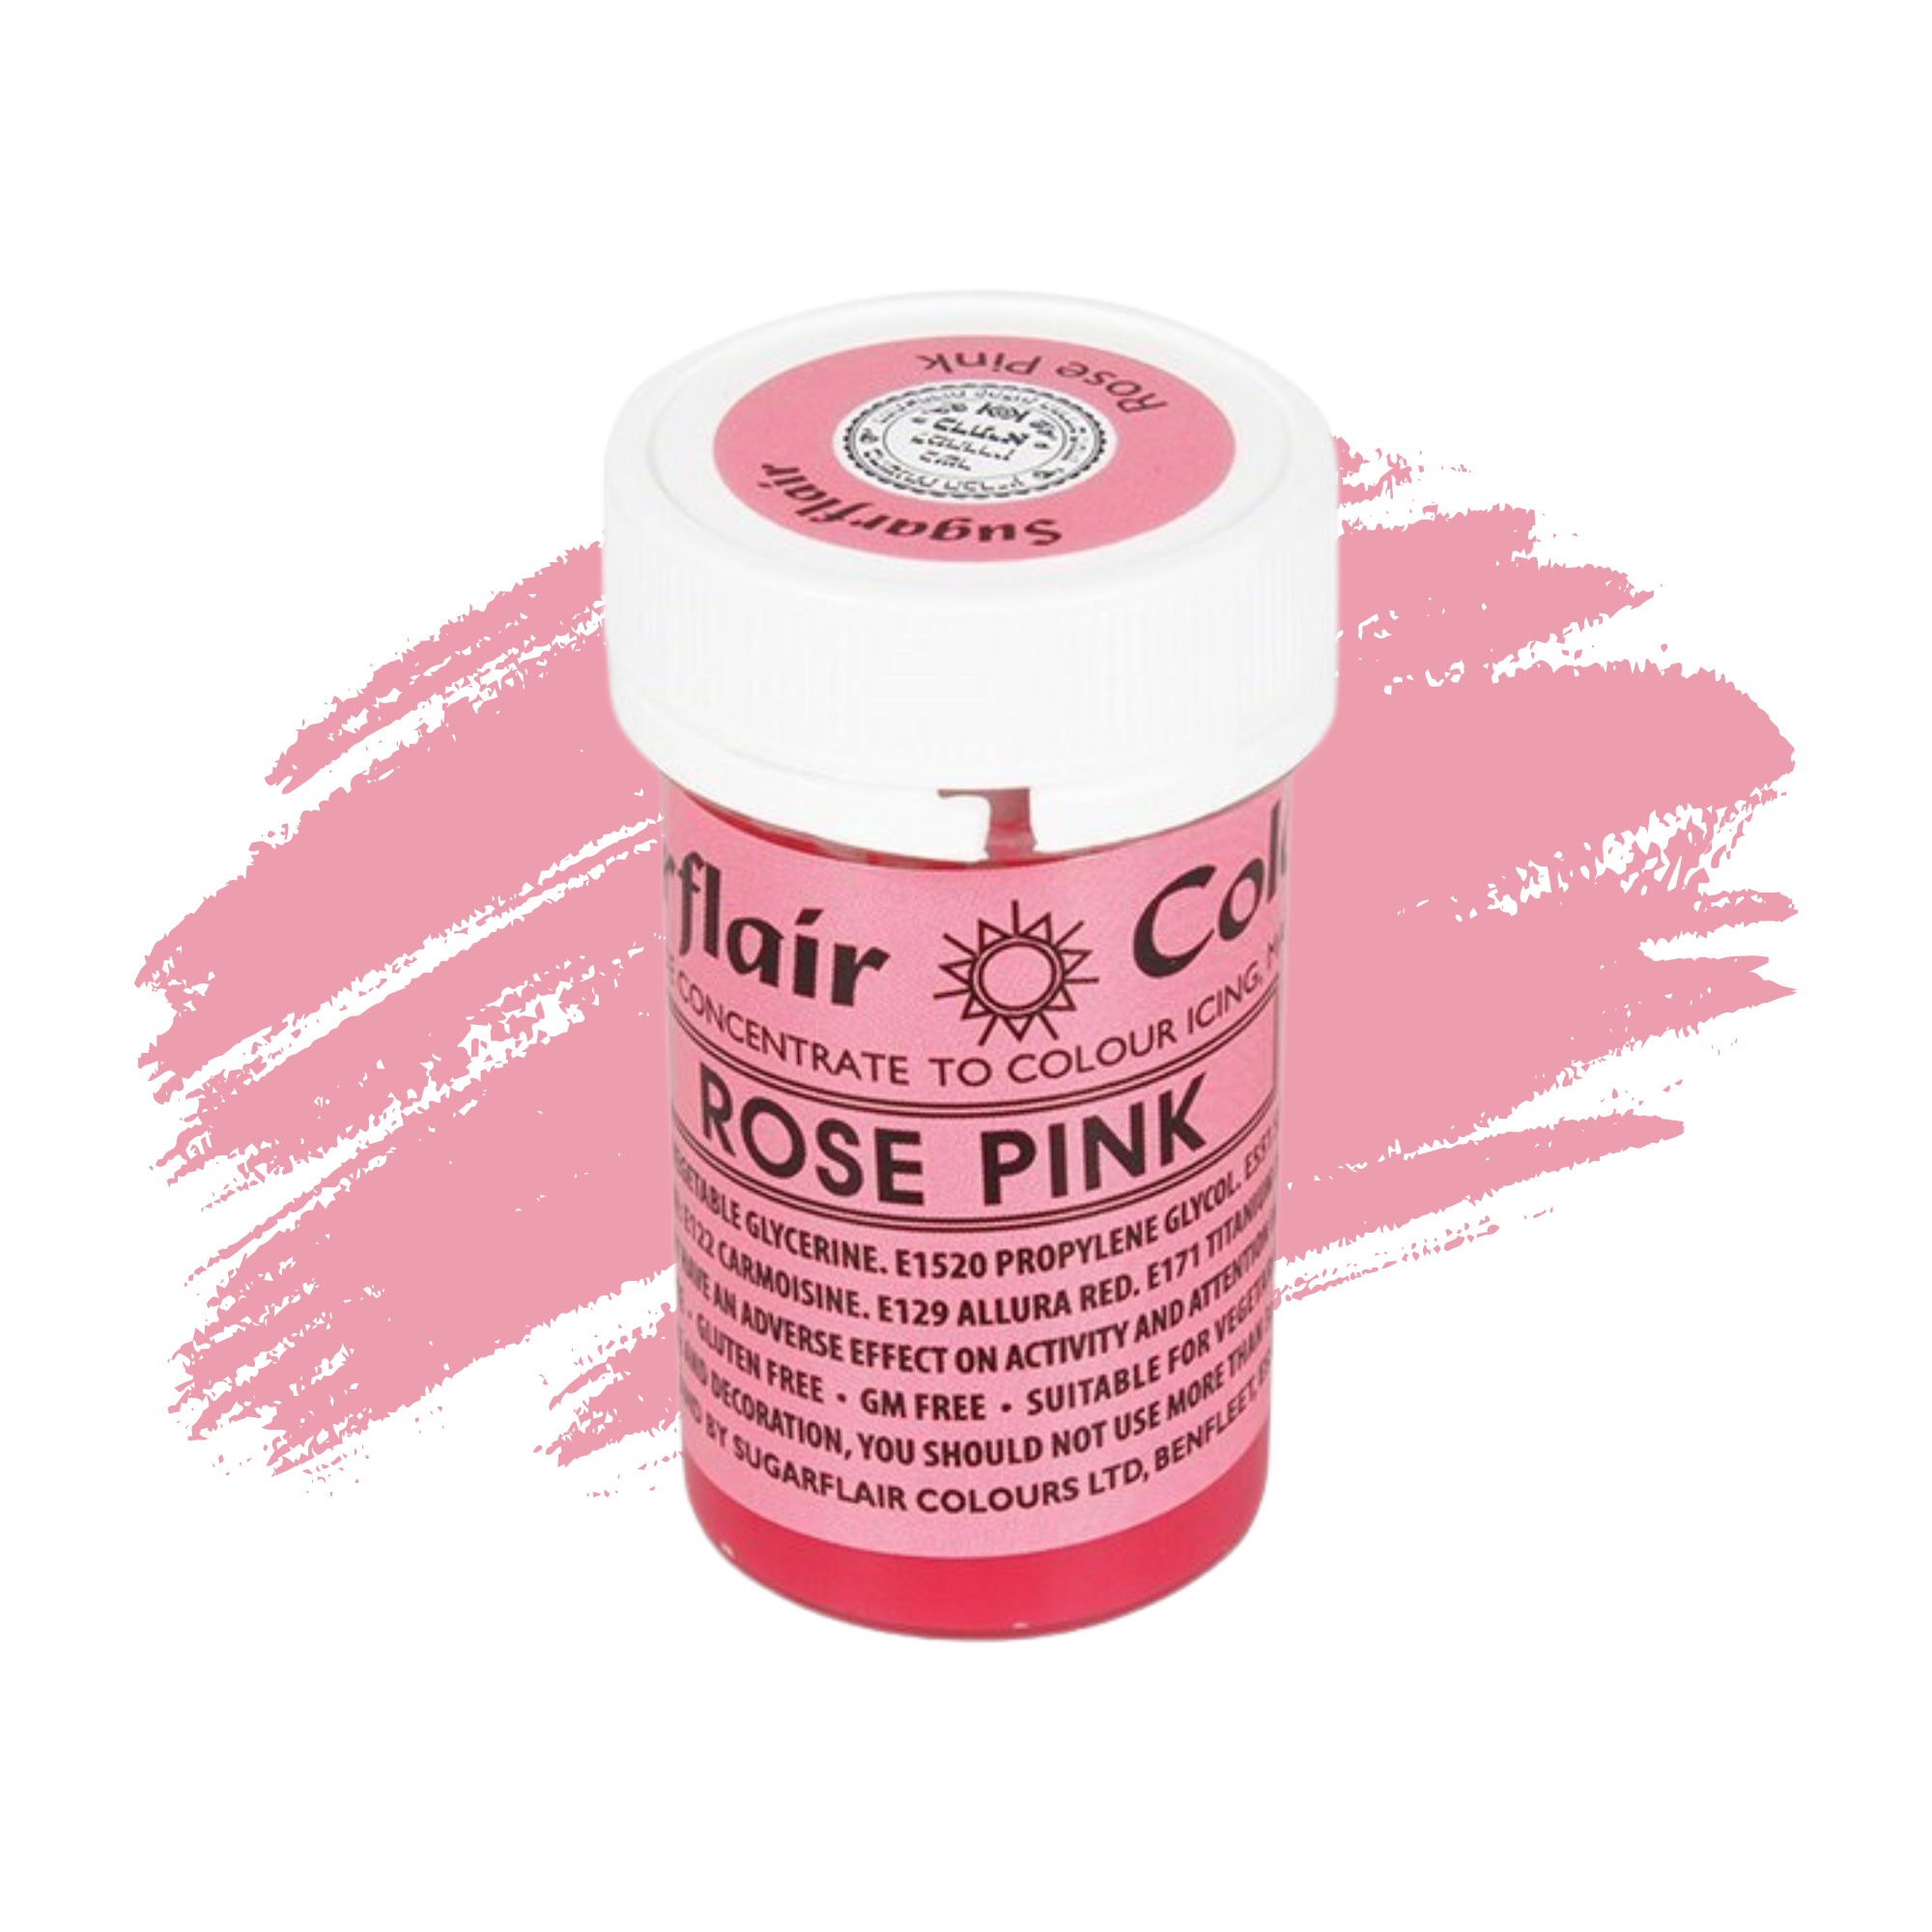 Sugarflair Paste Colours Concentrated Food Colouring - Spectral Rose Pink - 25g